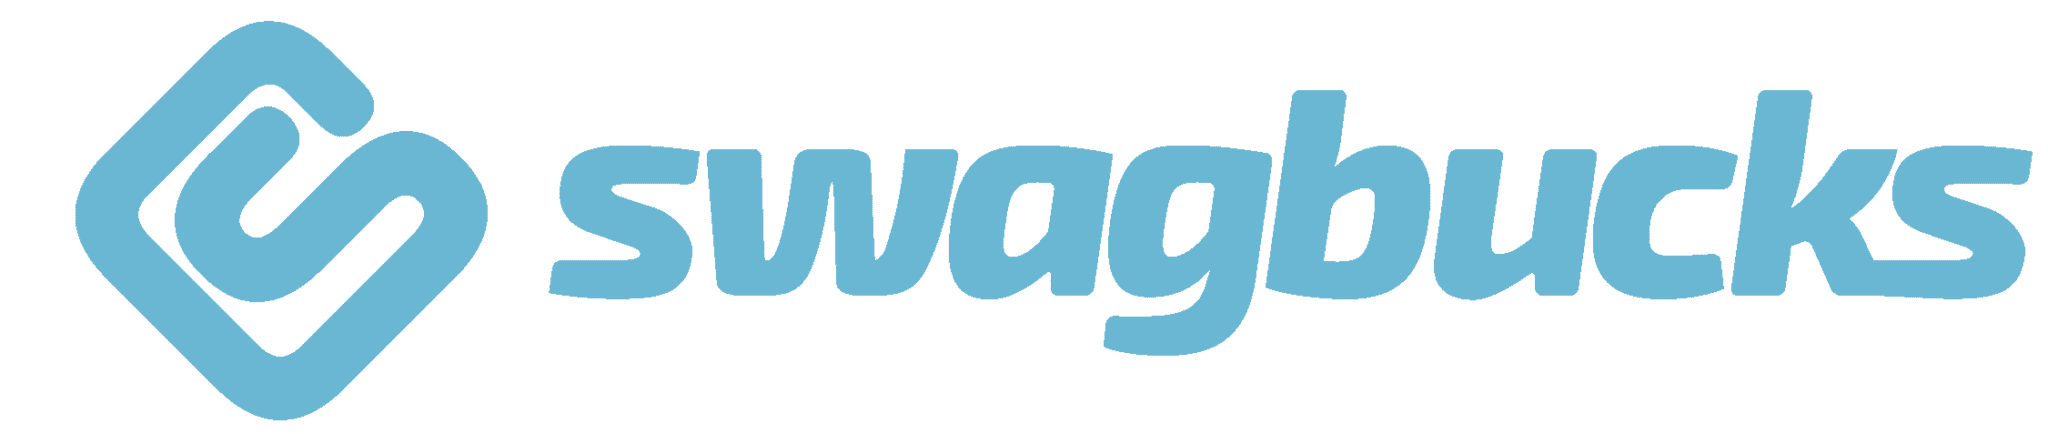 How to make money from home: take surveys with Swagbucks